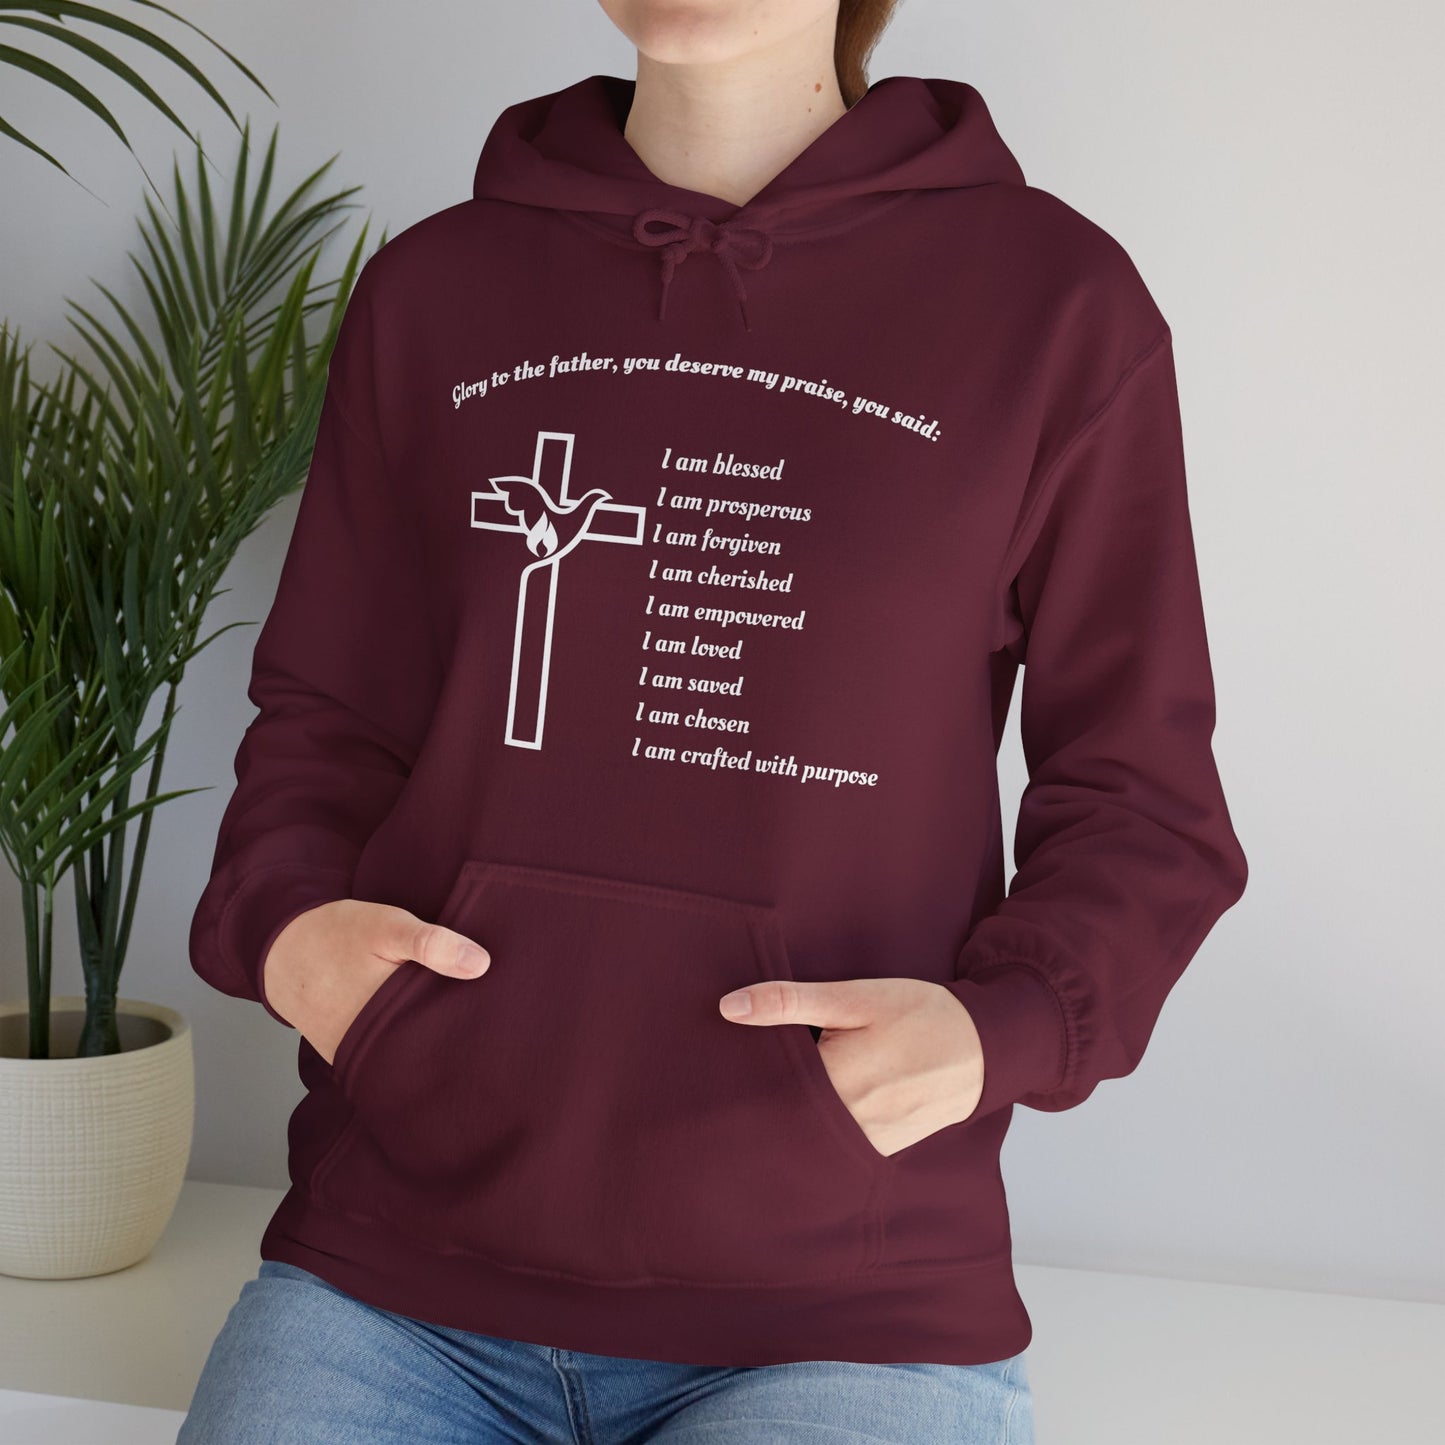 I am Glory to the Father Hooded Sweatshirt Unisex Cozy Heavy Blend5